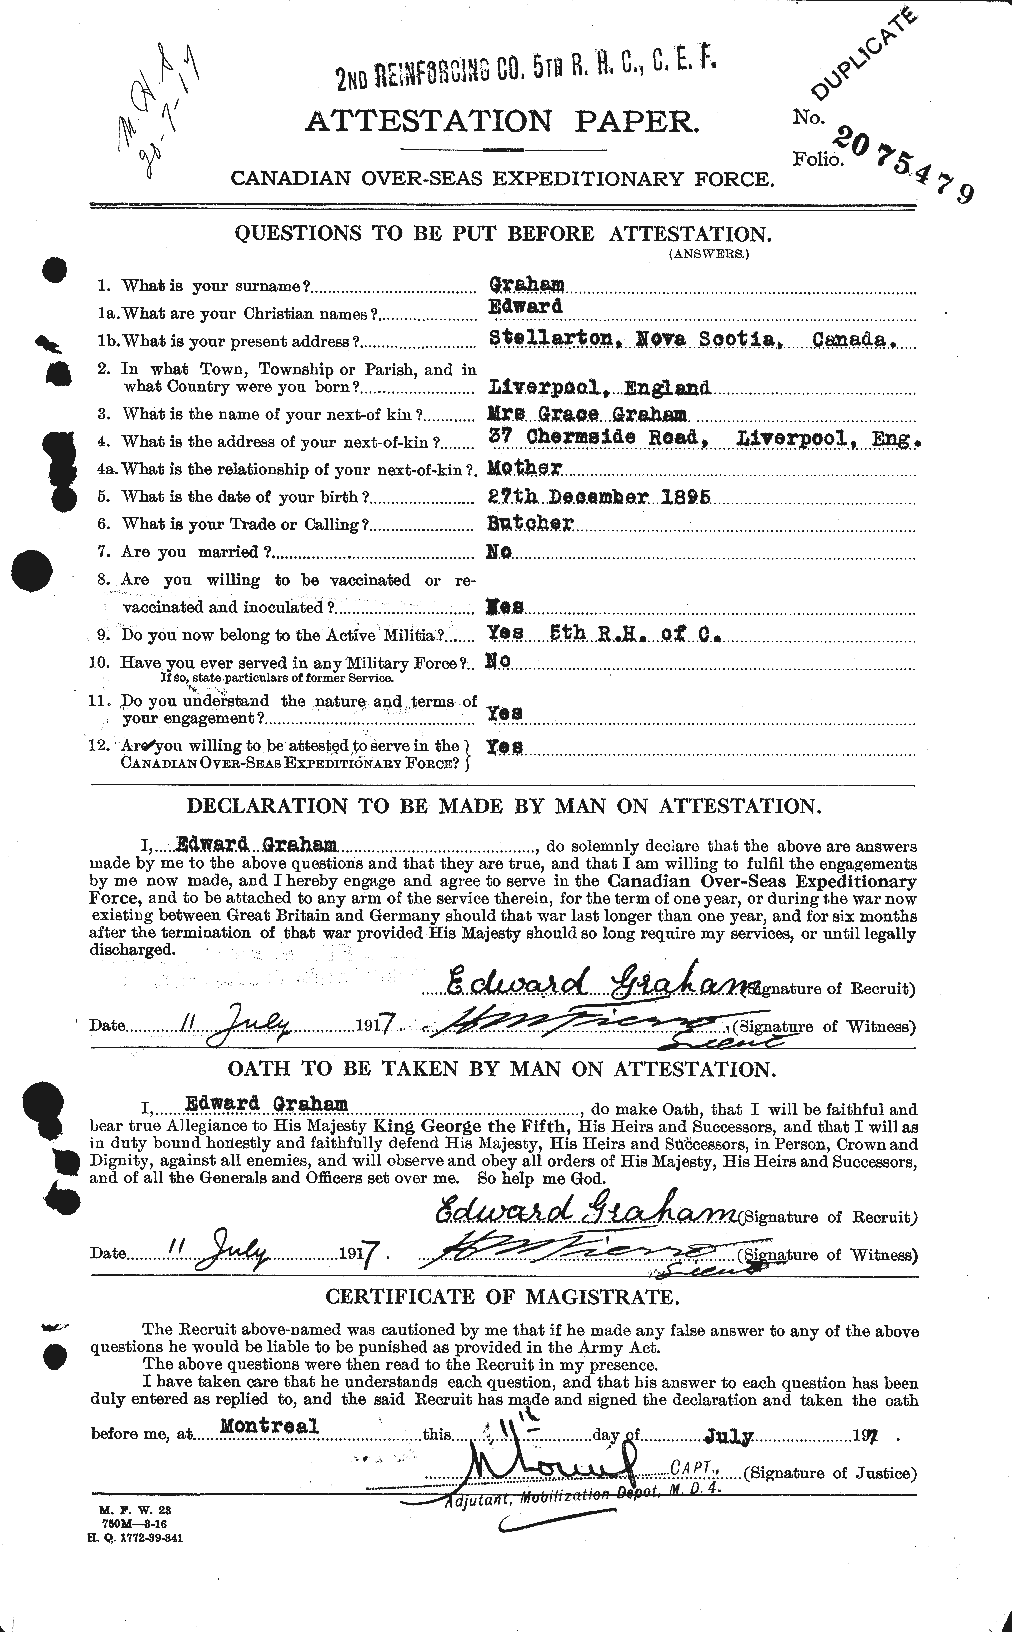 Personnel Records of the First World War - CEF 353864a